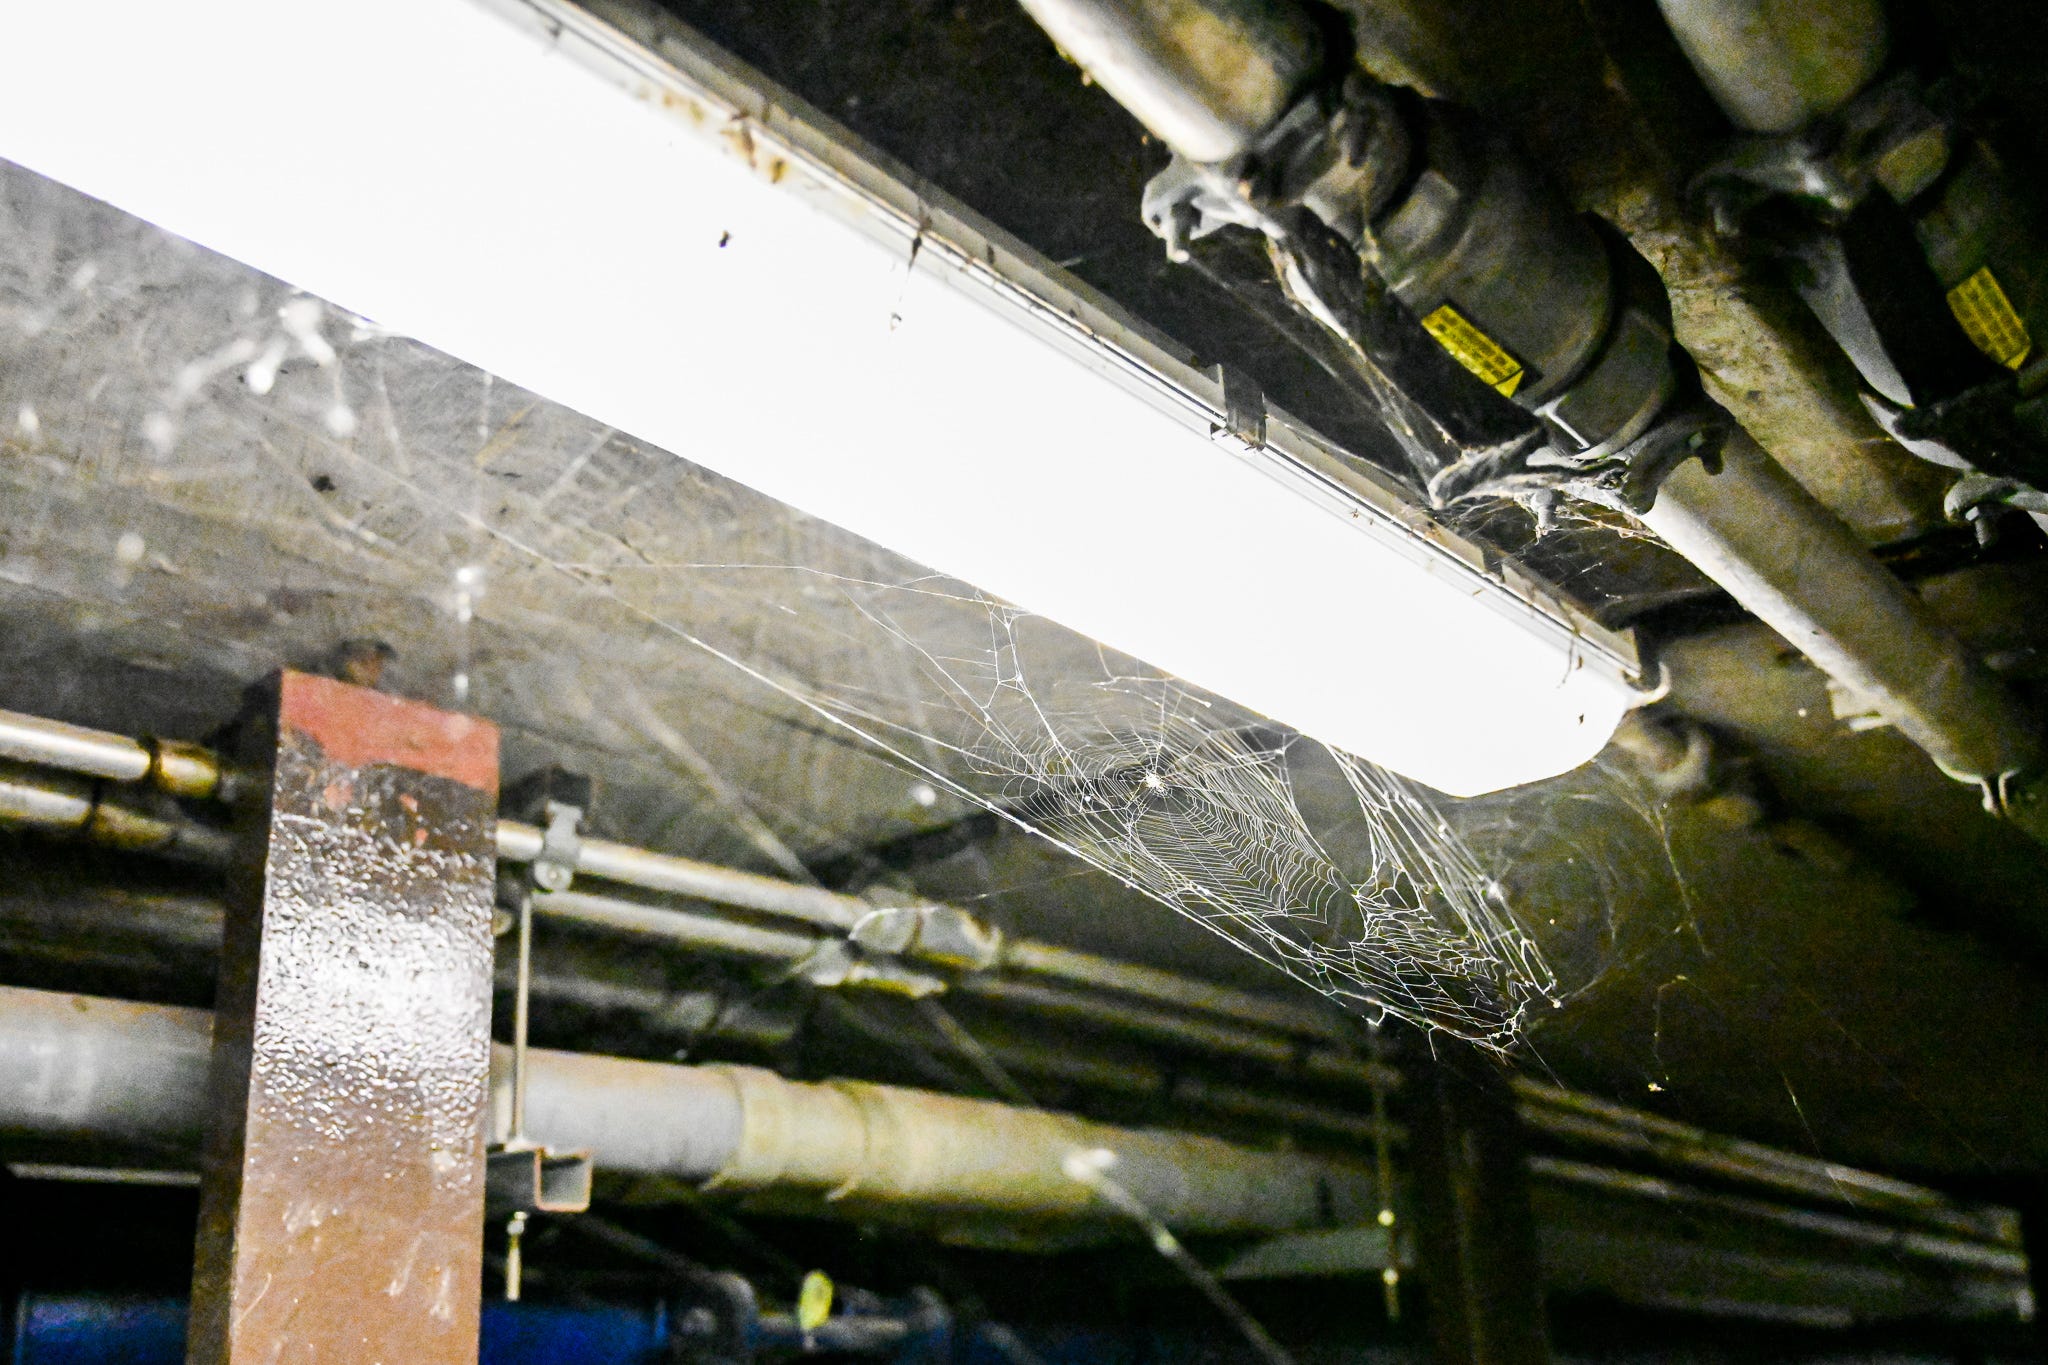 spiderwebs stretch between pipes and a long white LED overhead light in a tunnel underground. the glow illuminates columns and duct work in the background that fade into darkness farther away from the source.